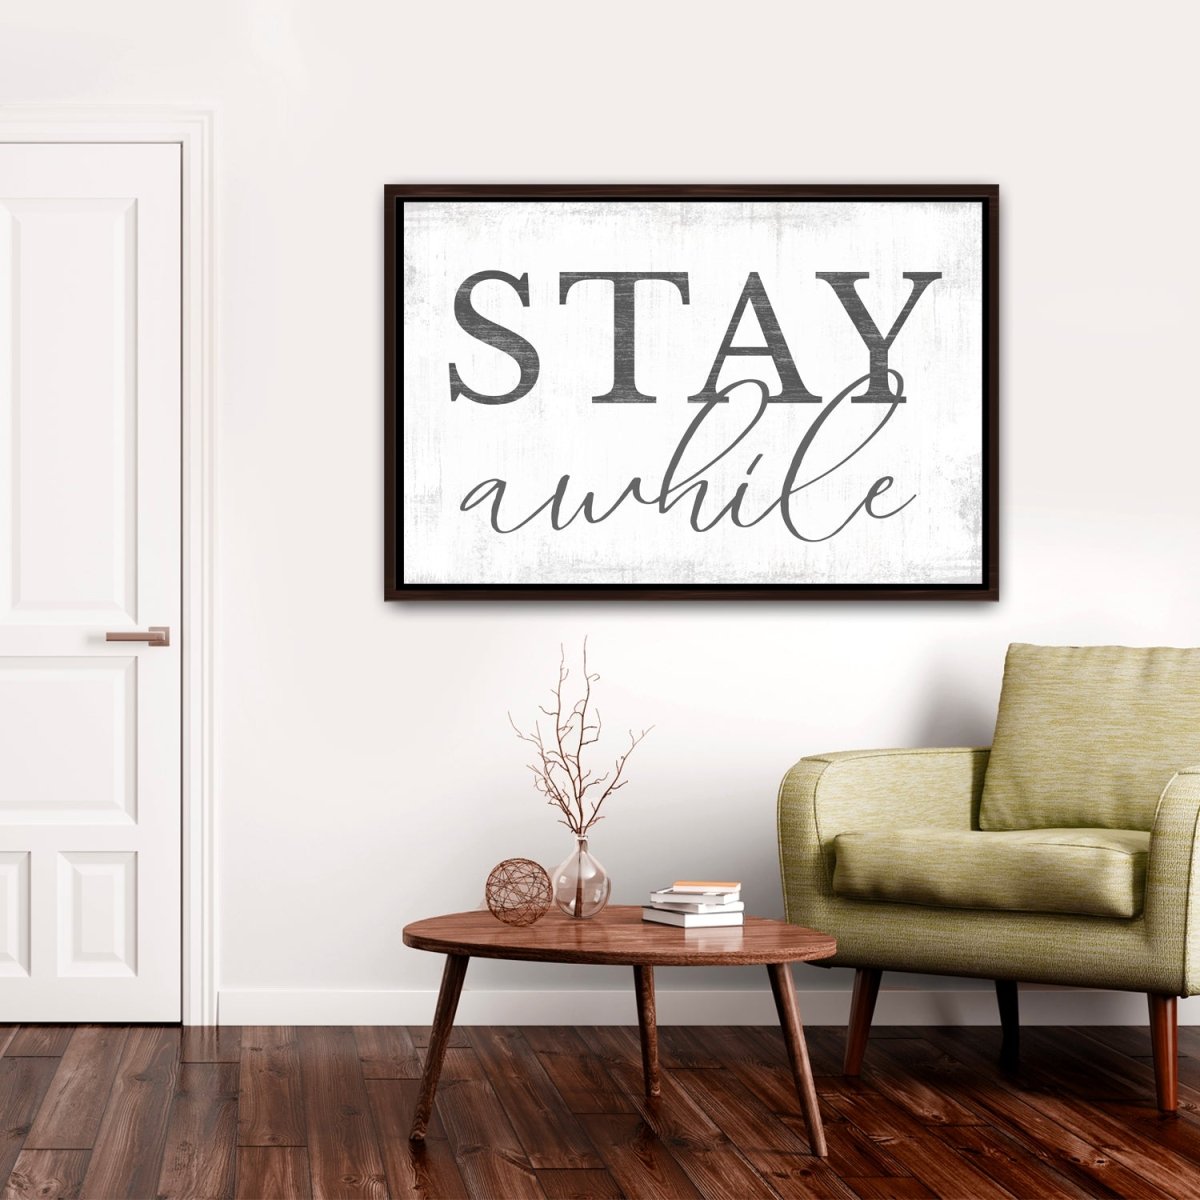 Stay Awhile Large Canvas Sign in Living Room - Pretty Perfect Studio